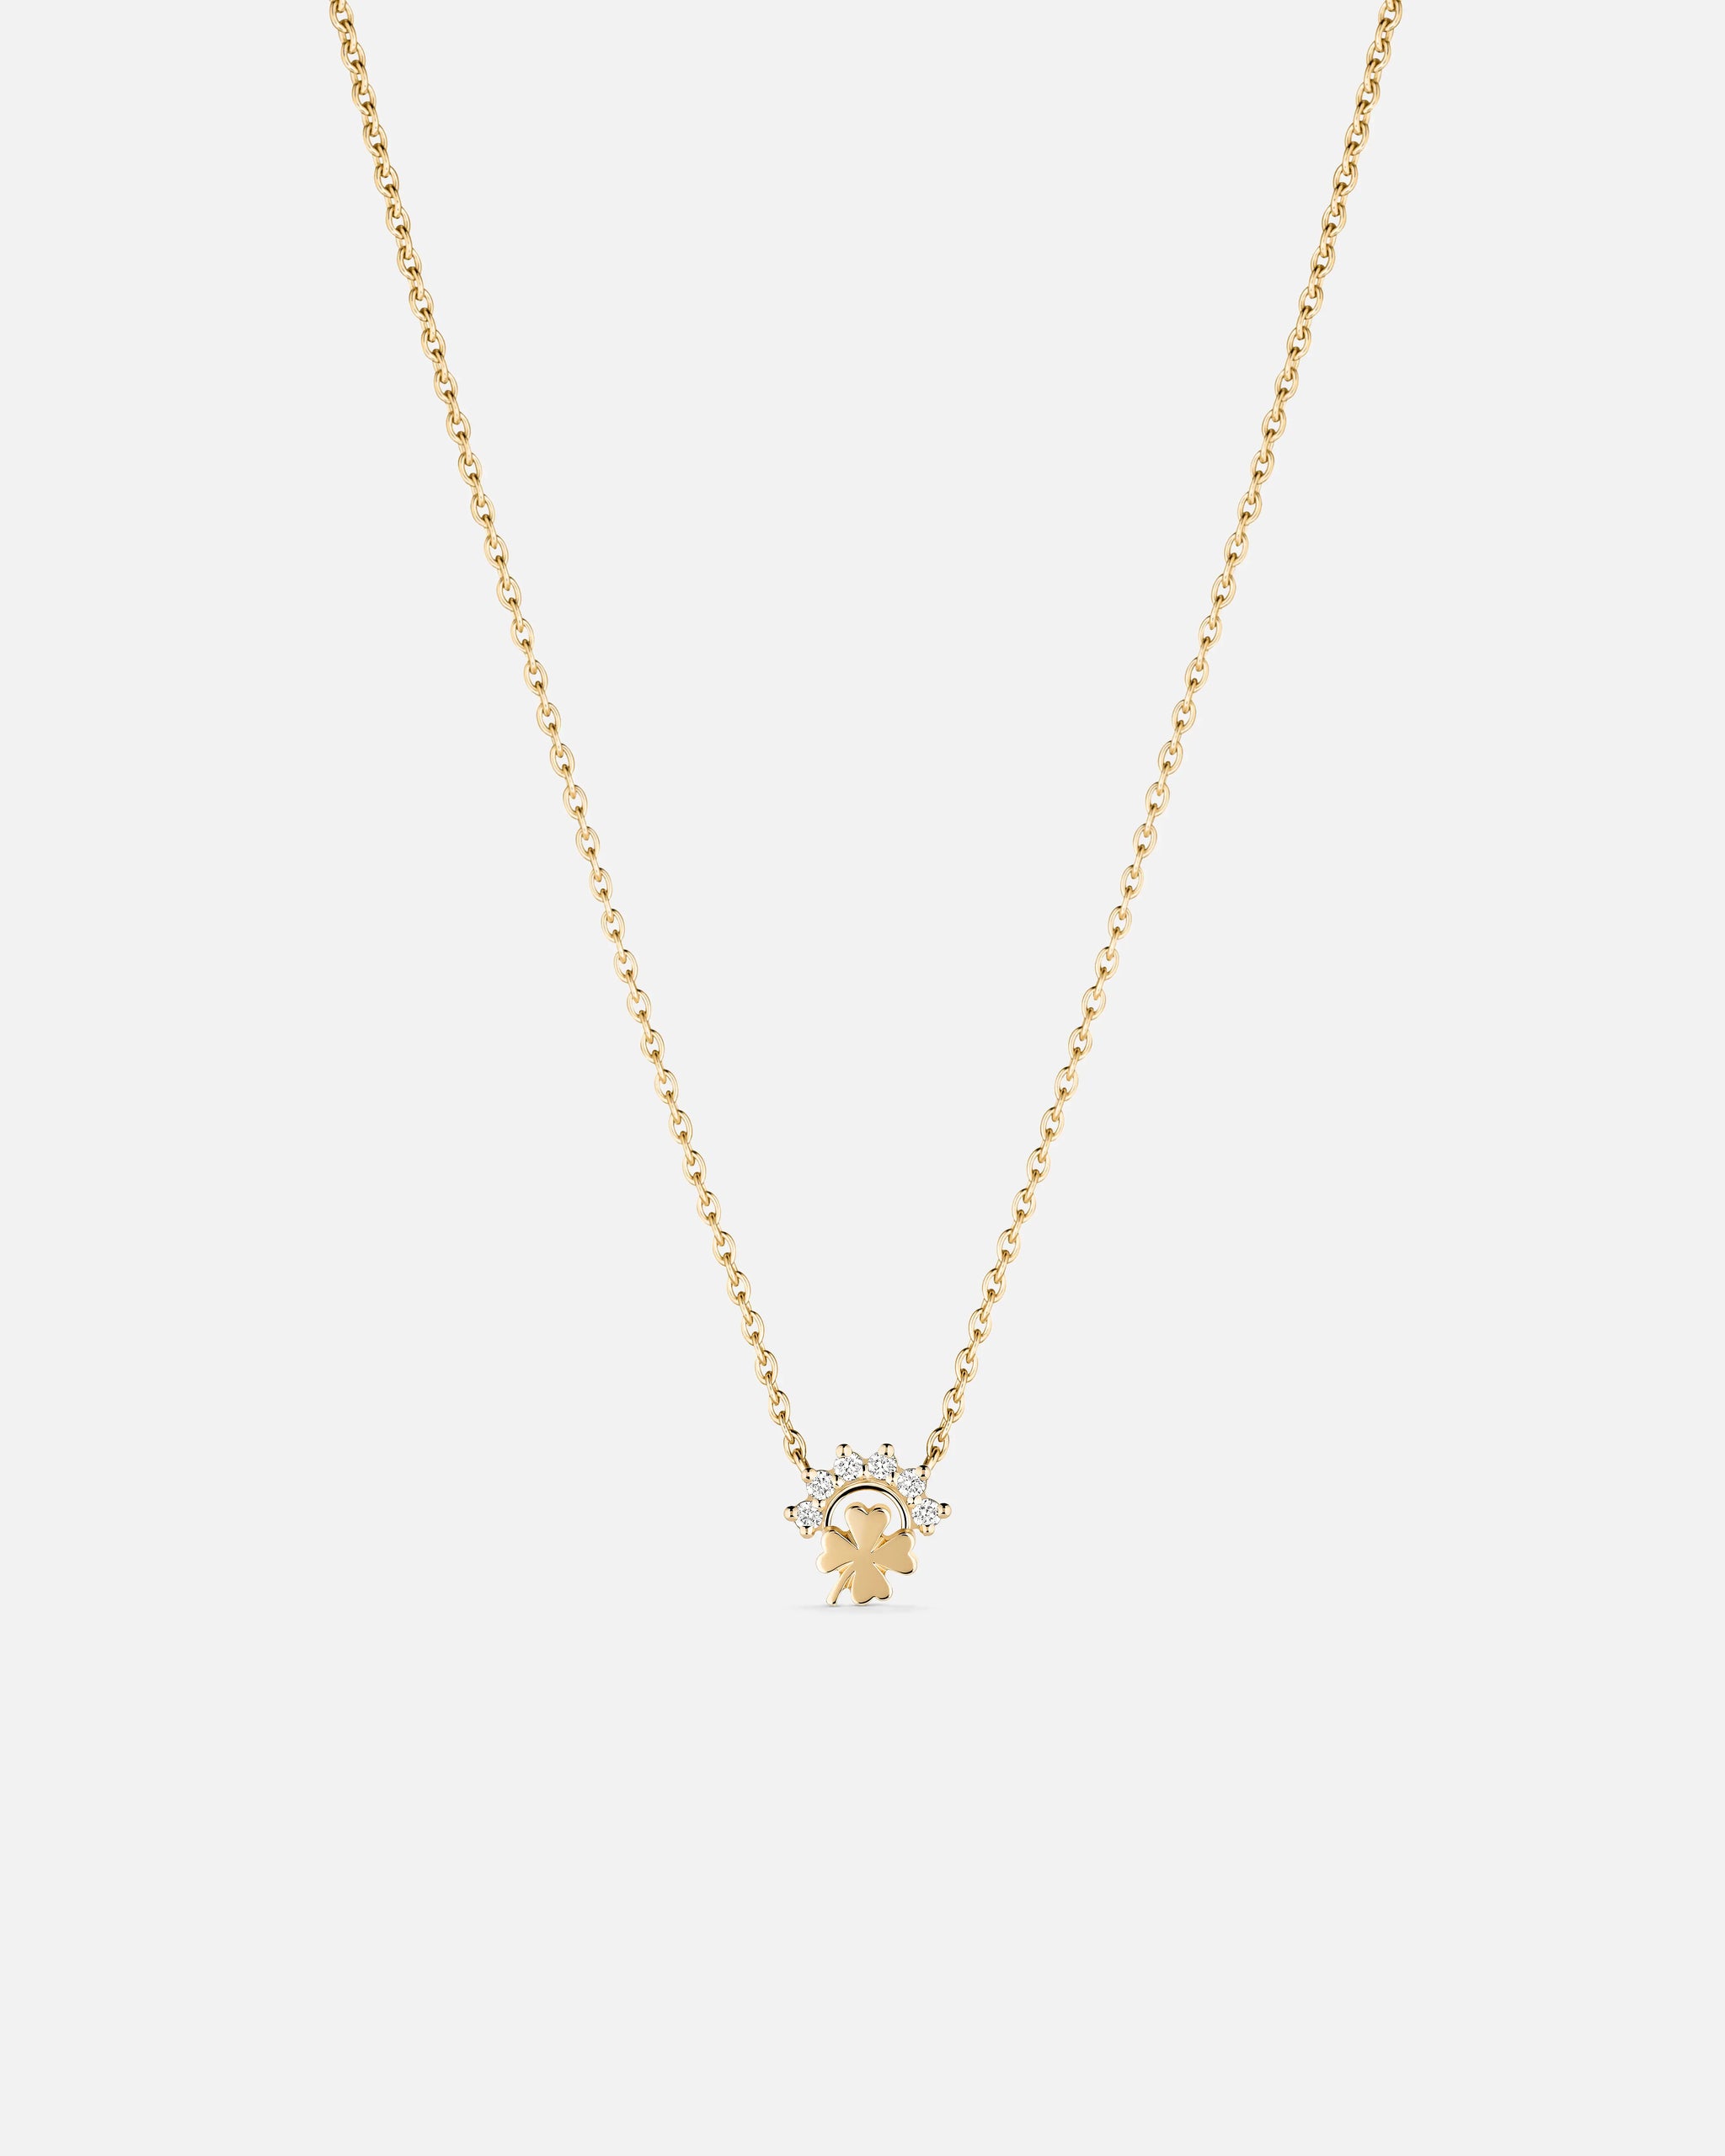 Small Luck Pendant in Yellow Gold - 1 - Nouvel Heritage